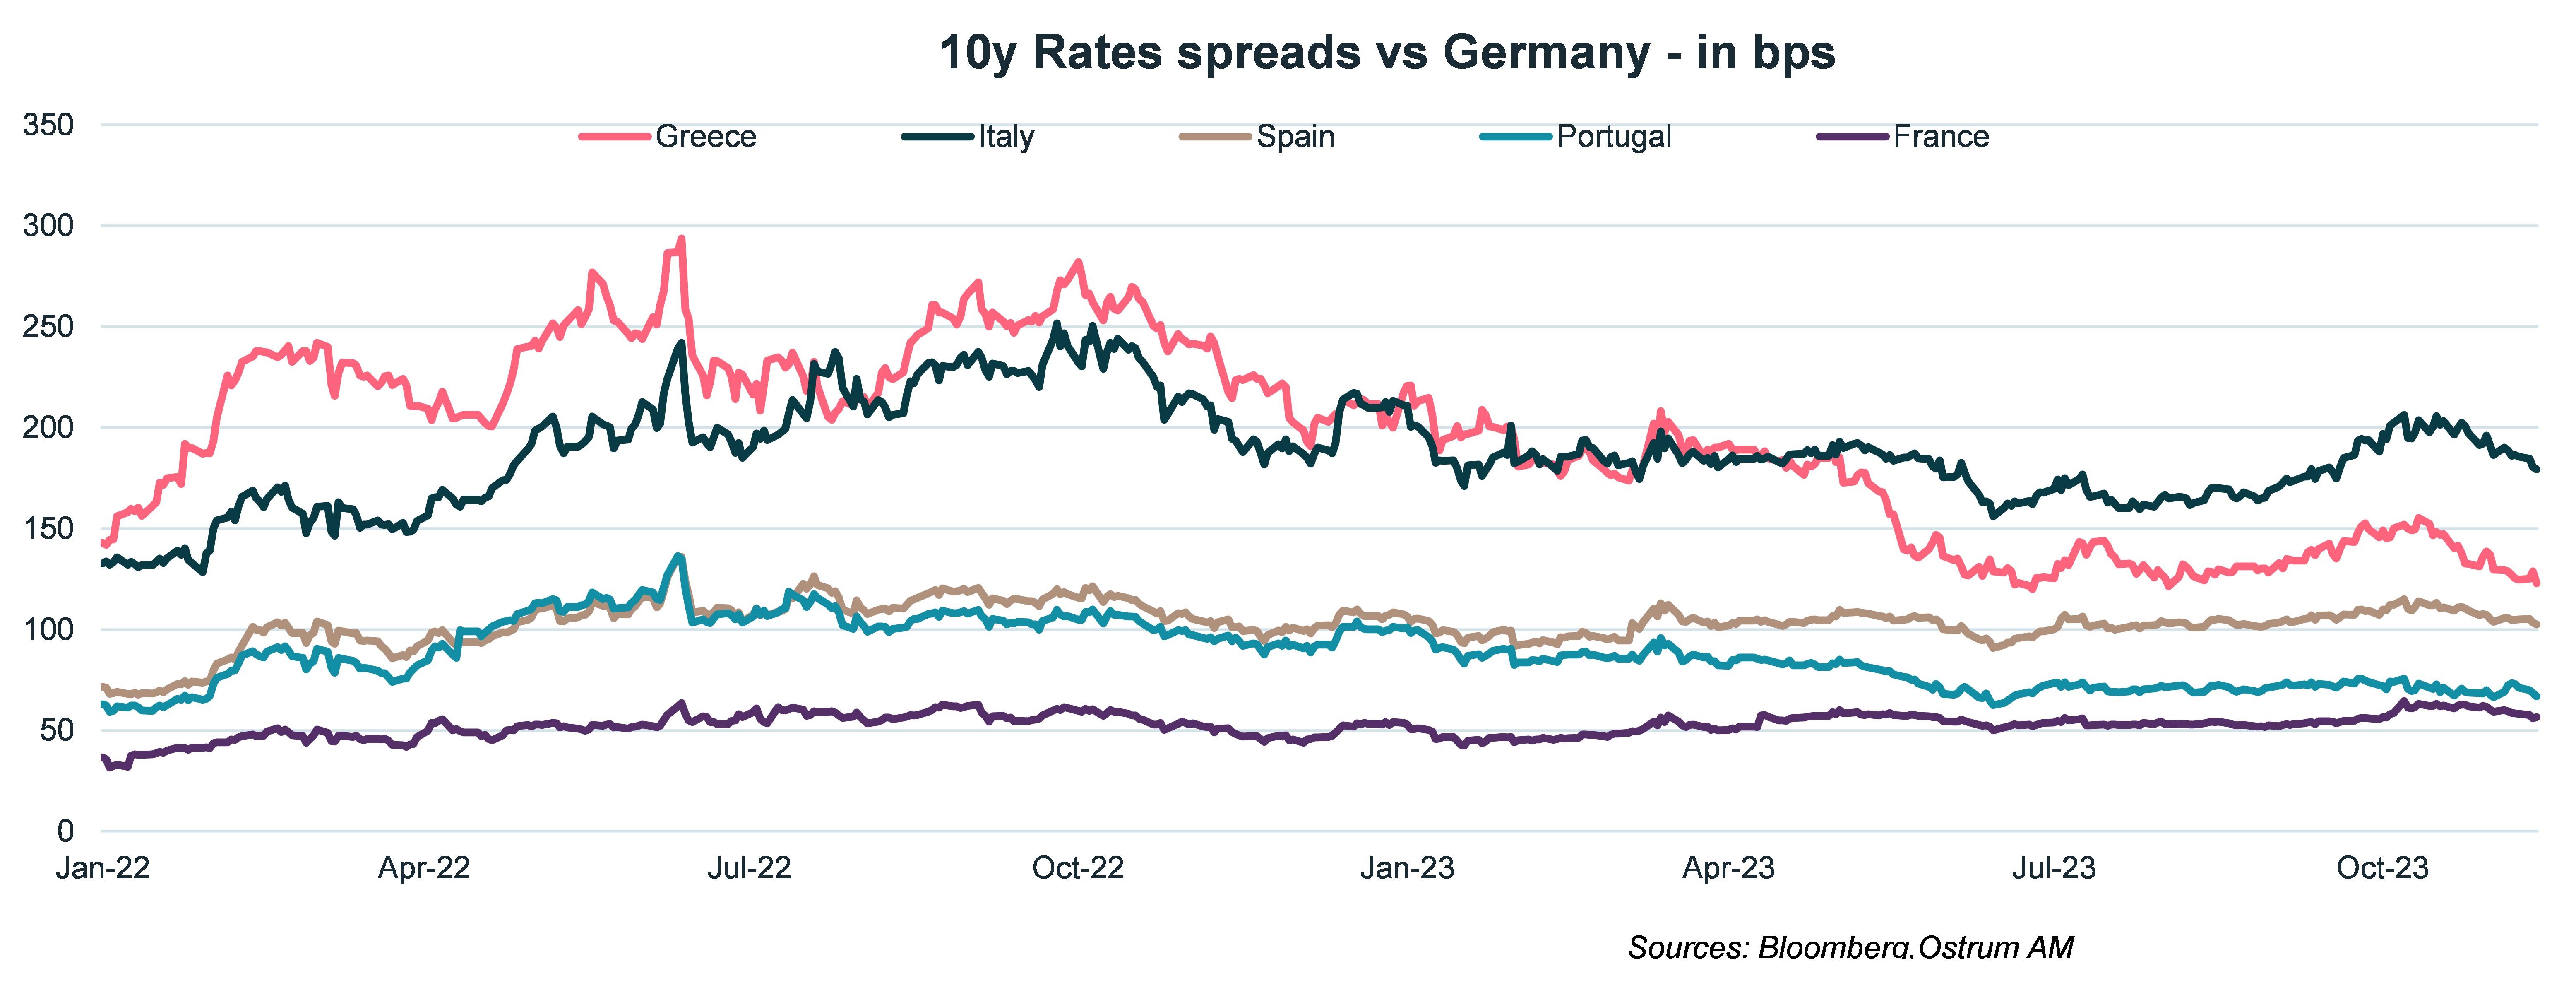 10-year-rates-spreads-vs-germany-in-bps